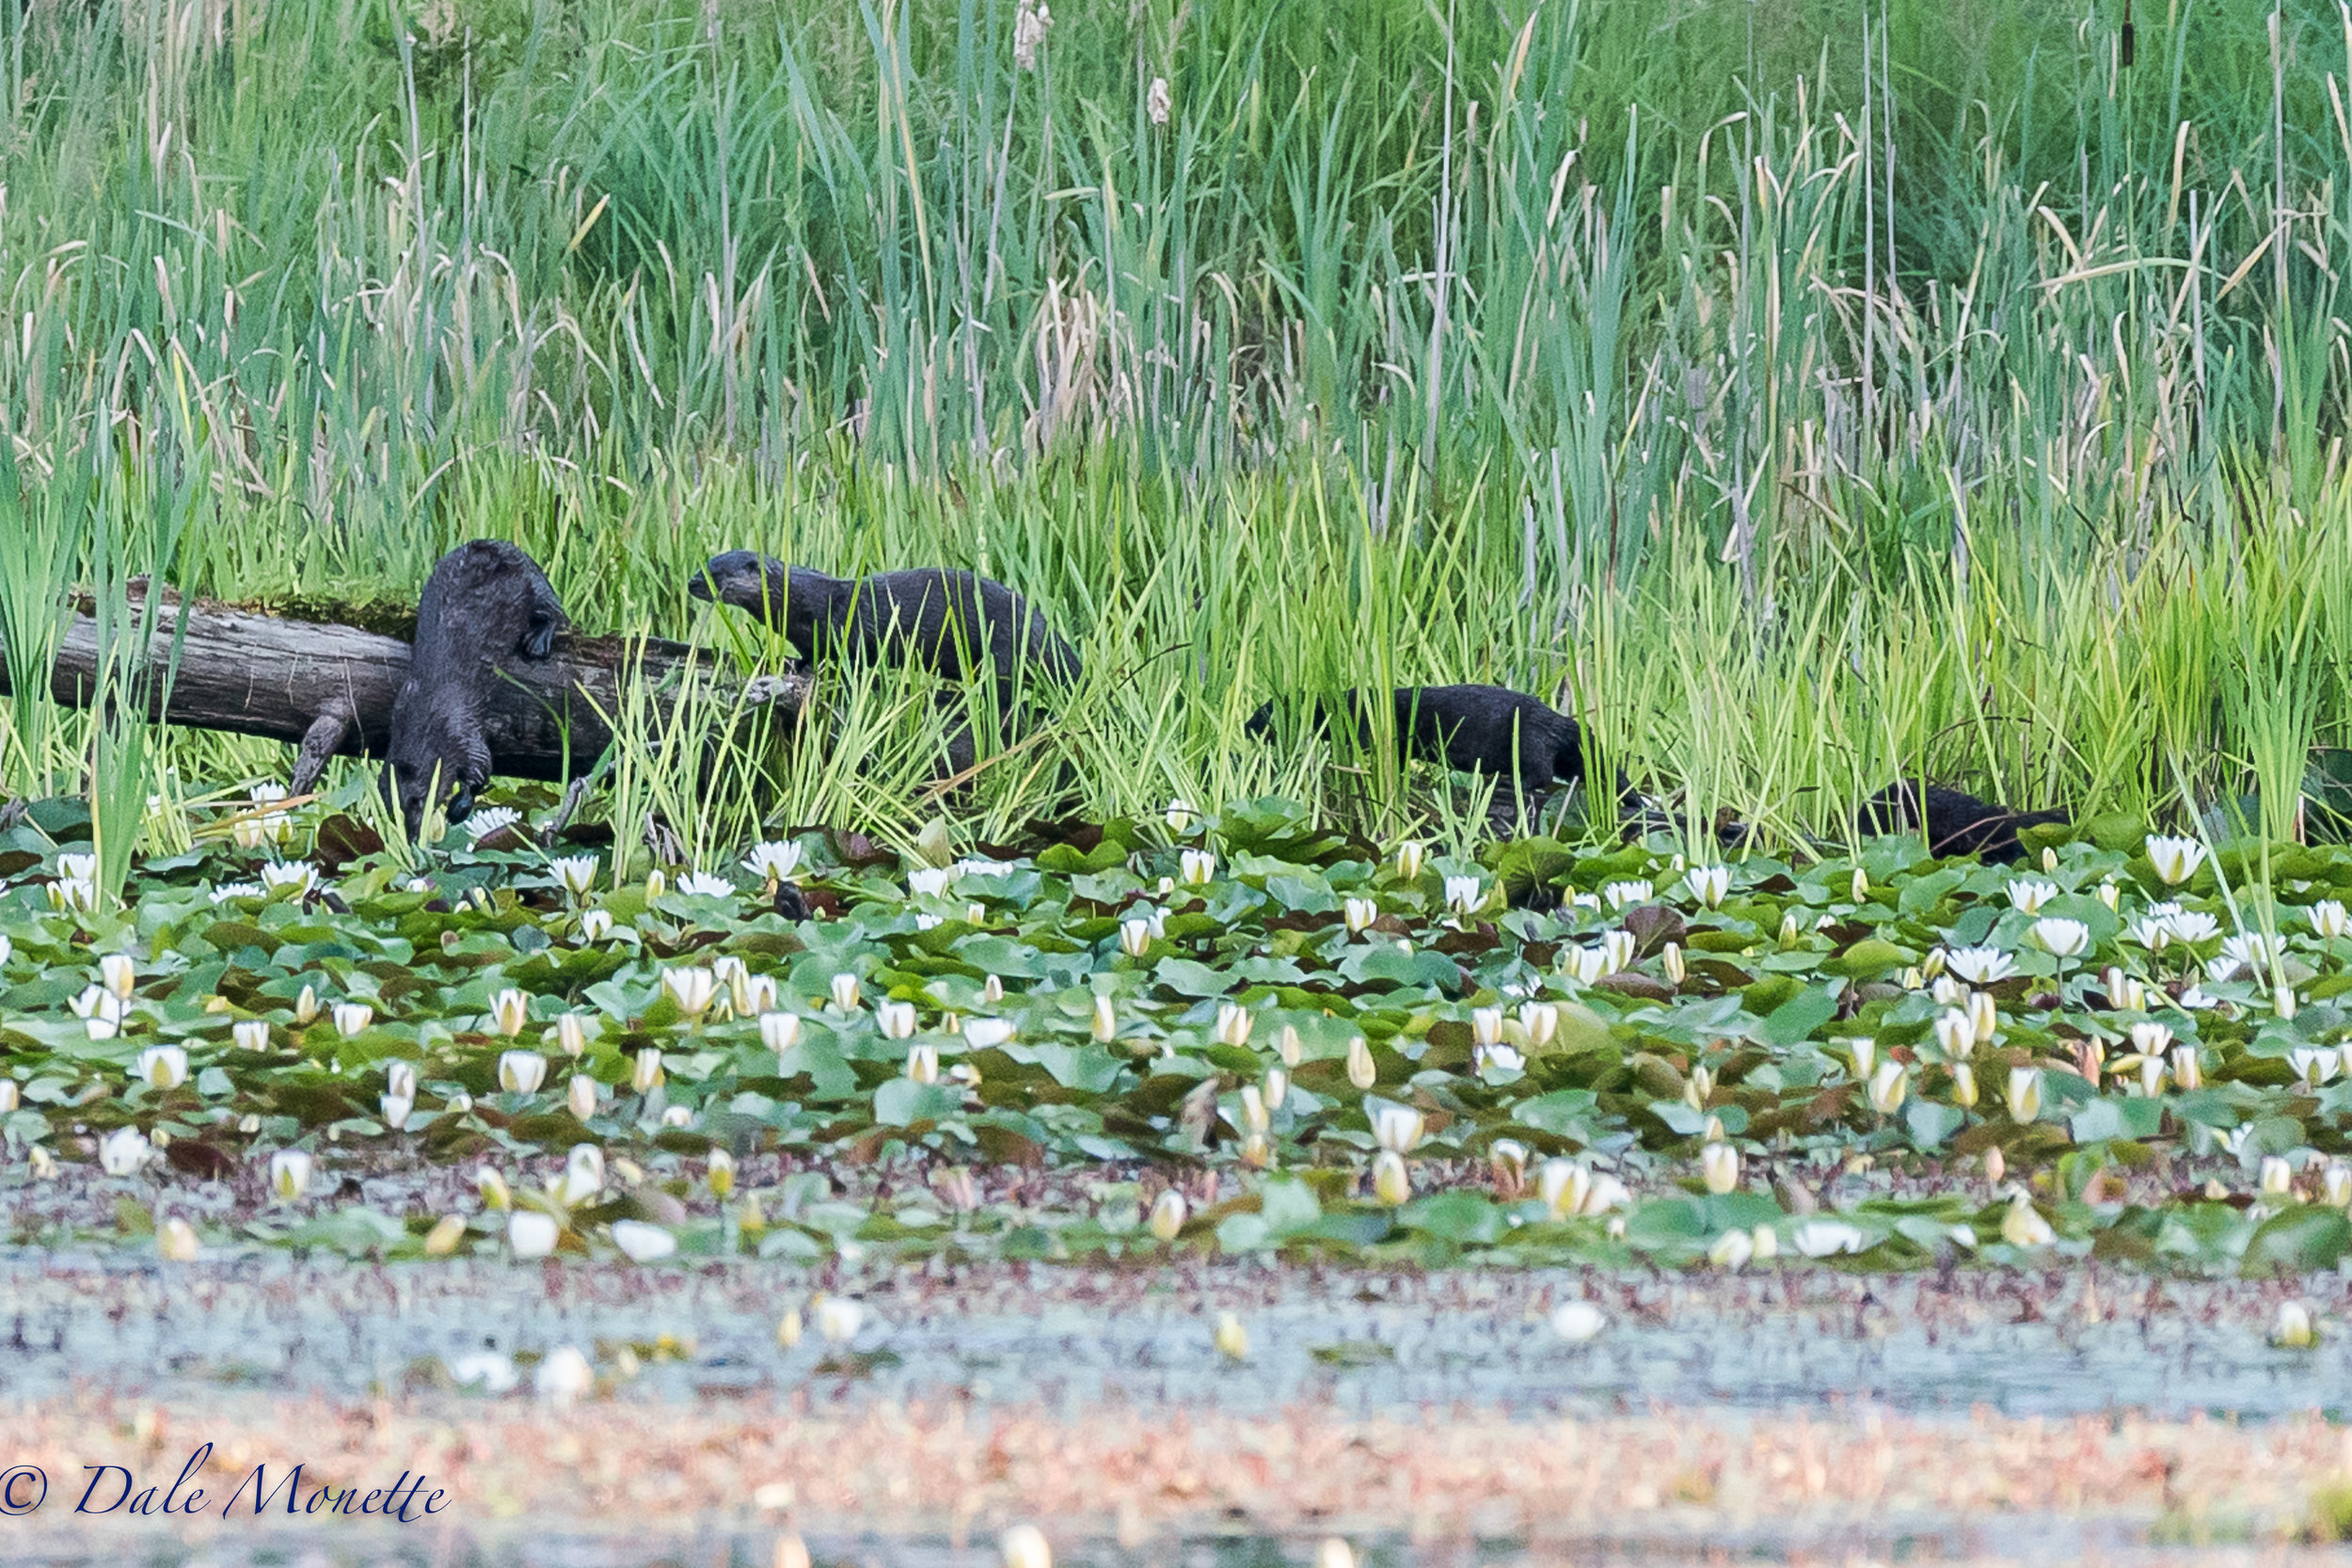   (Now kids, this is how we jump off a log) &nbsp;I found this family of otters this morning exploring the beaver pond they were learning to fish in. &nbsp;Northern river otters always crack me up watching them and kits are even funnier ! &nbsp;7/23/